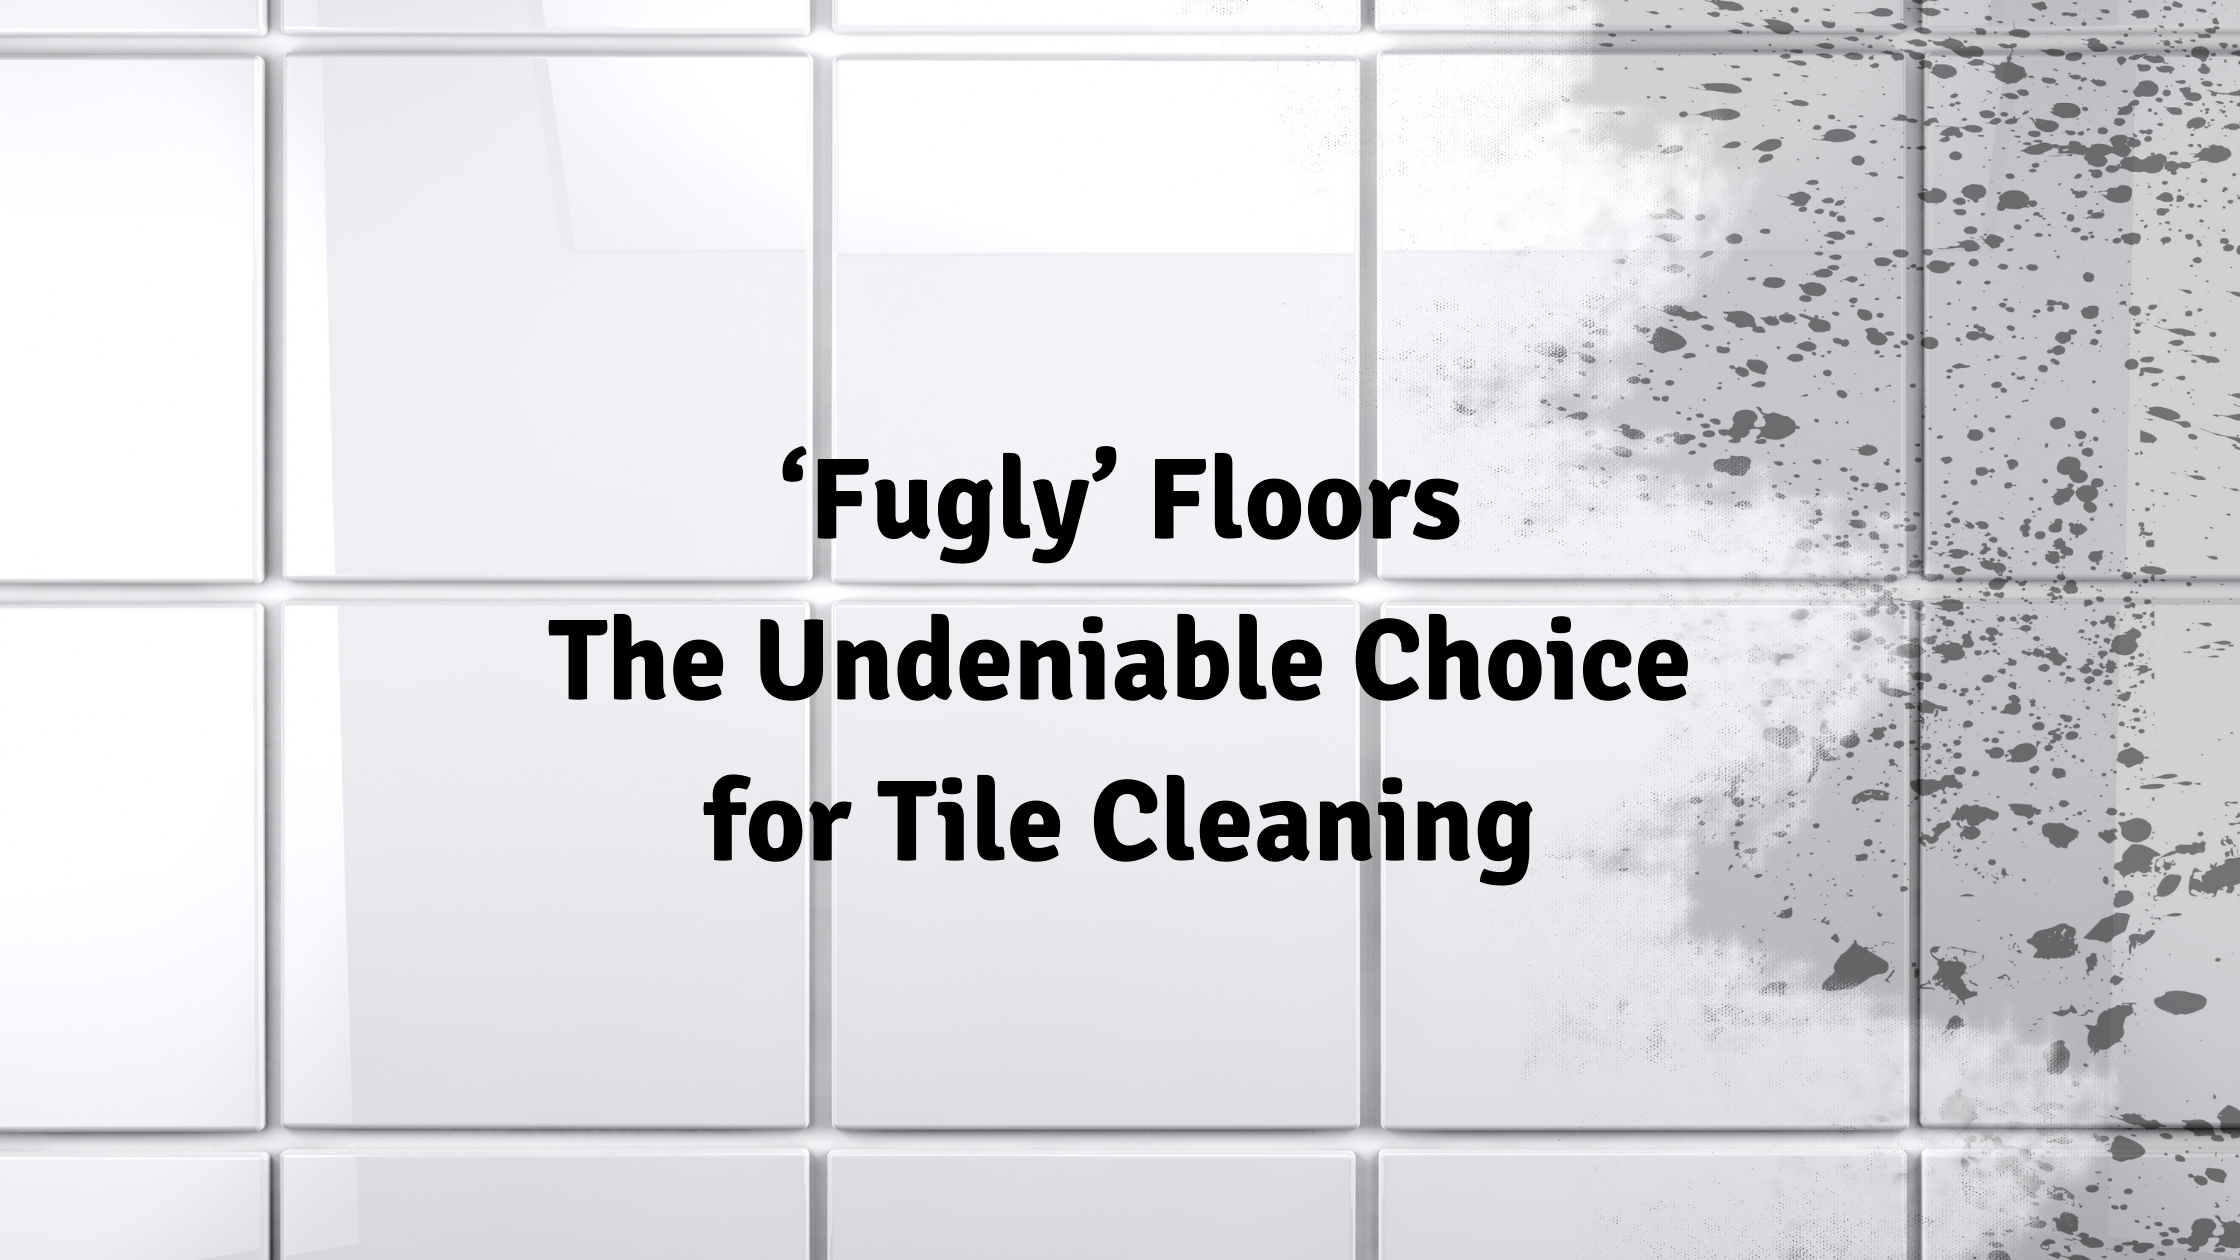 ‘Fugly’ Floors – The Undeniable Choice for Tile Cleaning 1